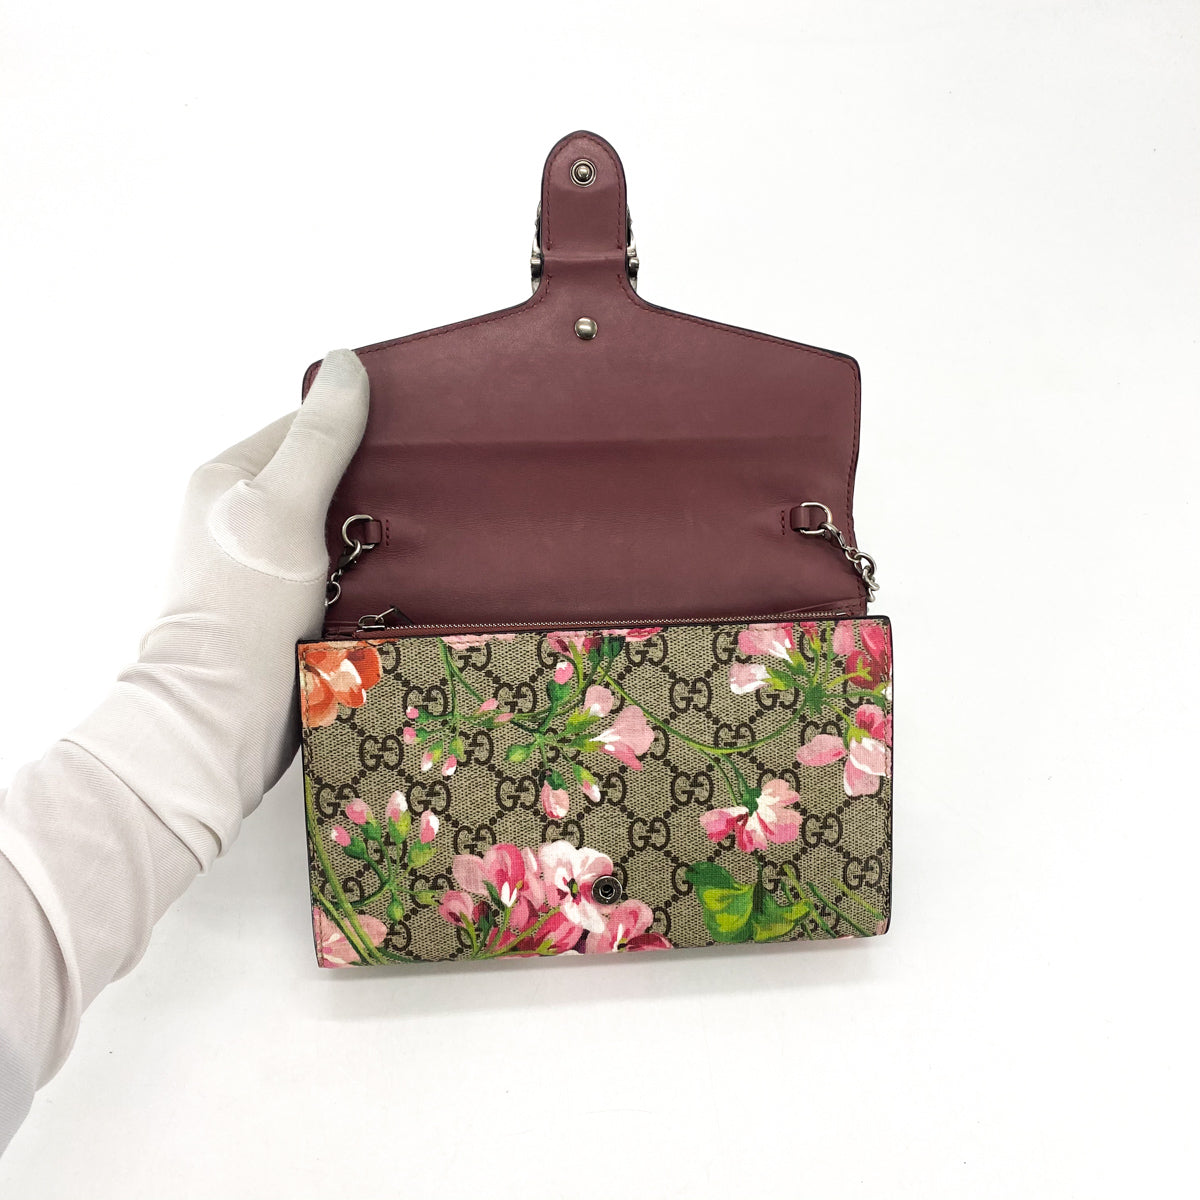 Authentic Gucci Floral Blooms Pink Supreme Chain Wallet Crossbody Medium Bag